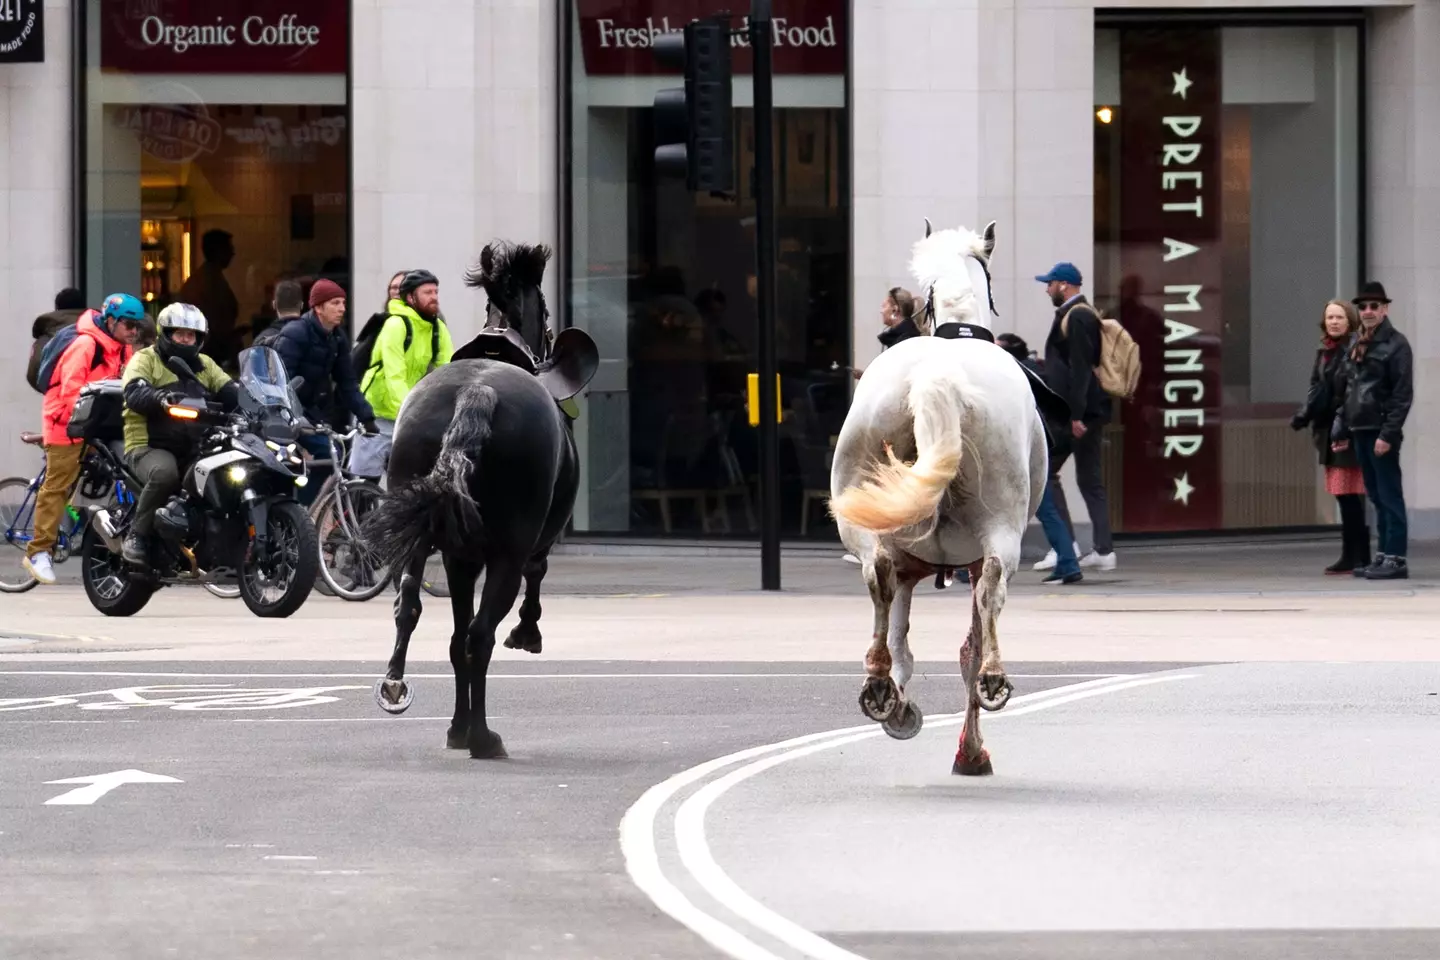 The horses appear to have been spooked, resulting in them running through central London. (PA)